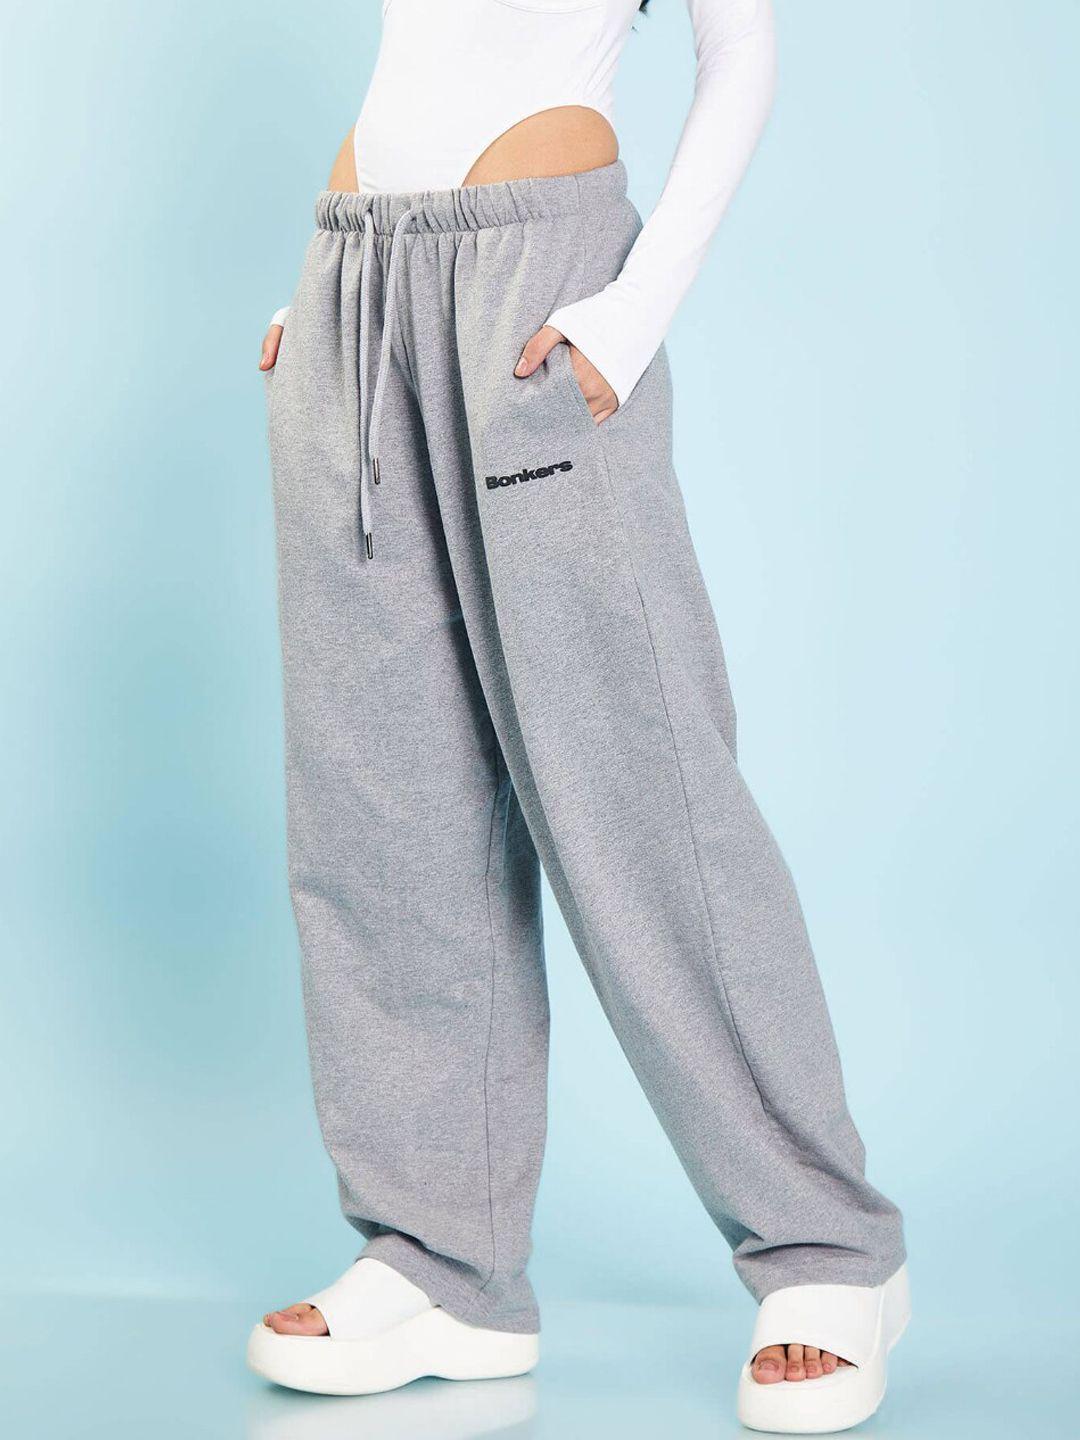 bonkers-corner-women-grey-cotton-relaxed-fit-track-pants